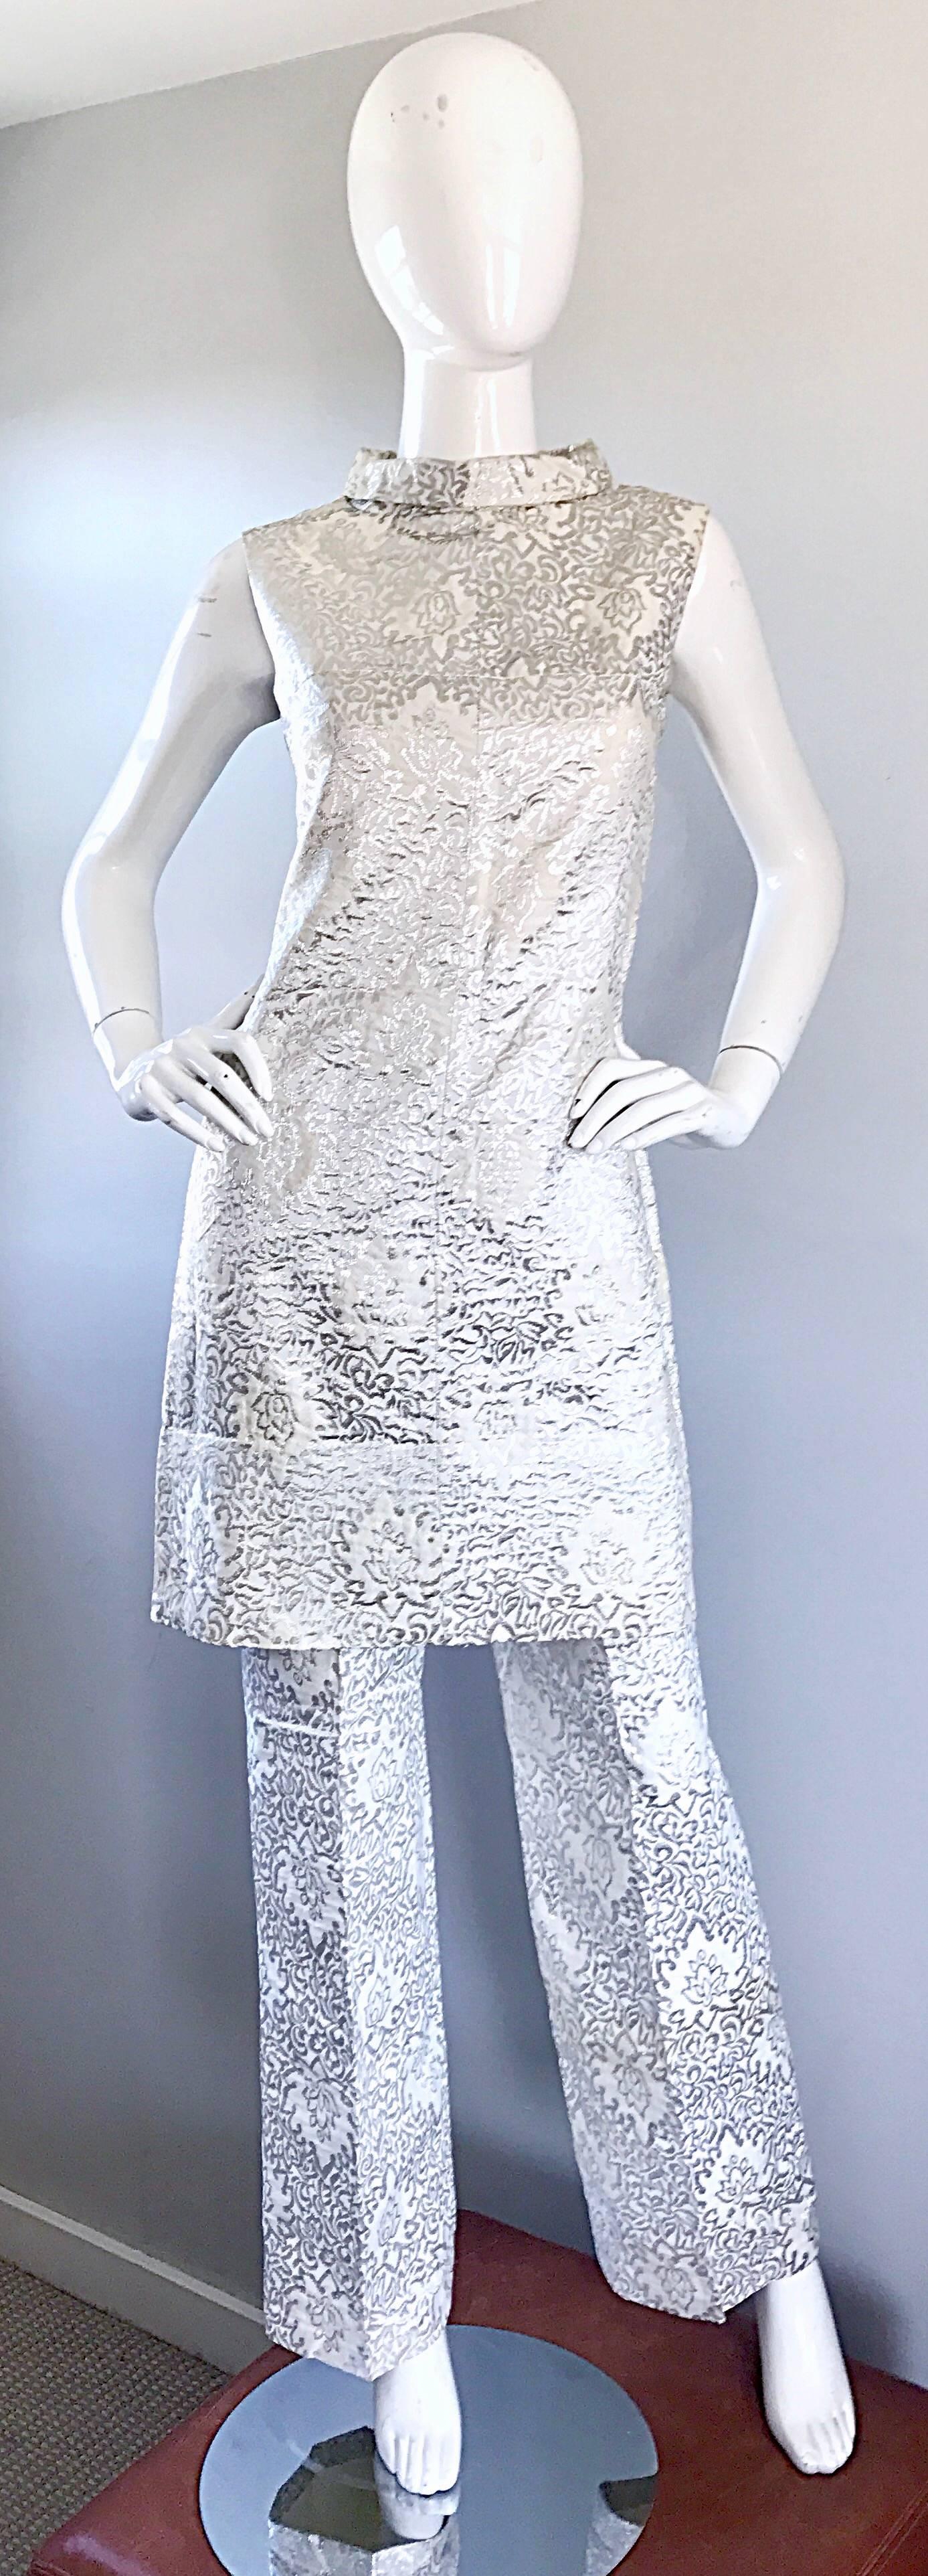 Smashing 1960s silver and white silk jacquard tunic dress AND trousers! Features a mod shift tunic dress, with a fitted bodice and full skirt. High 
Jackie-O styled collar. Full metal zipper up the back with hook-and-eye closure. Pants are high